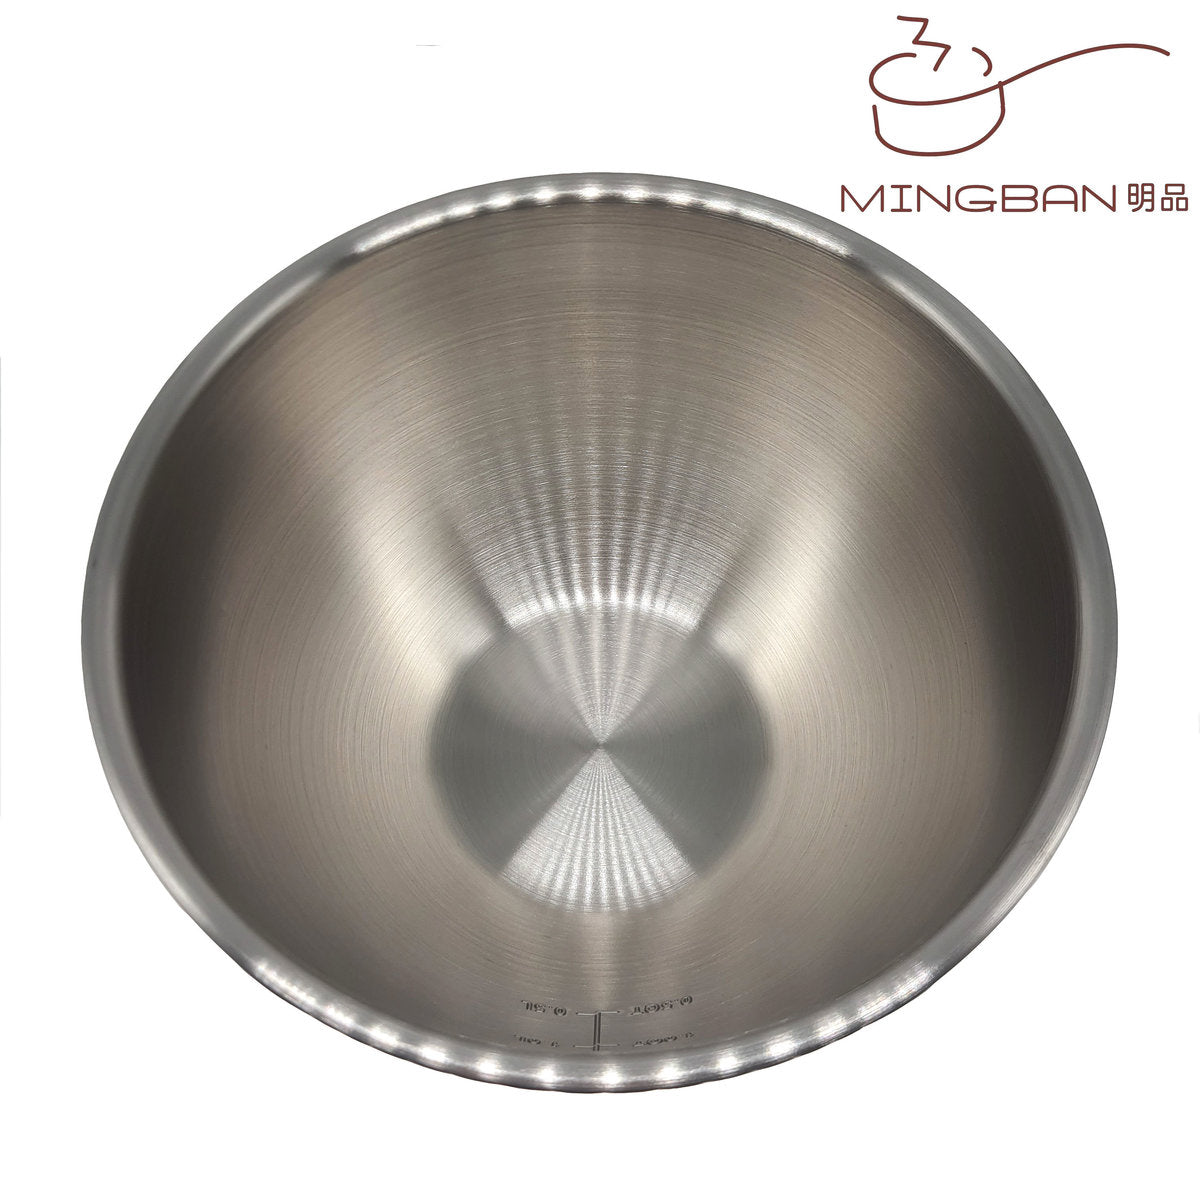 20cm Mixing Bowl with non-slip silicone bottom and inner measurement marks - 0.5L, 1.0L, 1.5L, 2.0L, 2.5L